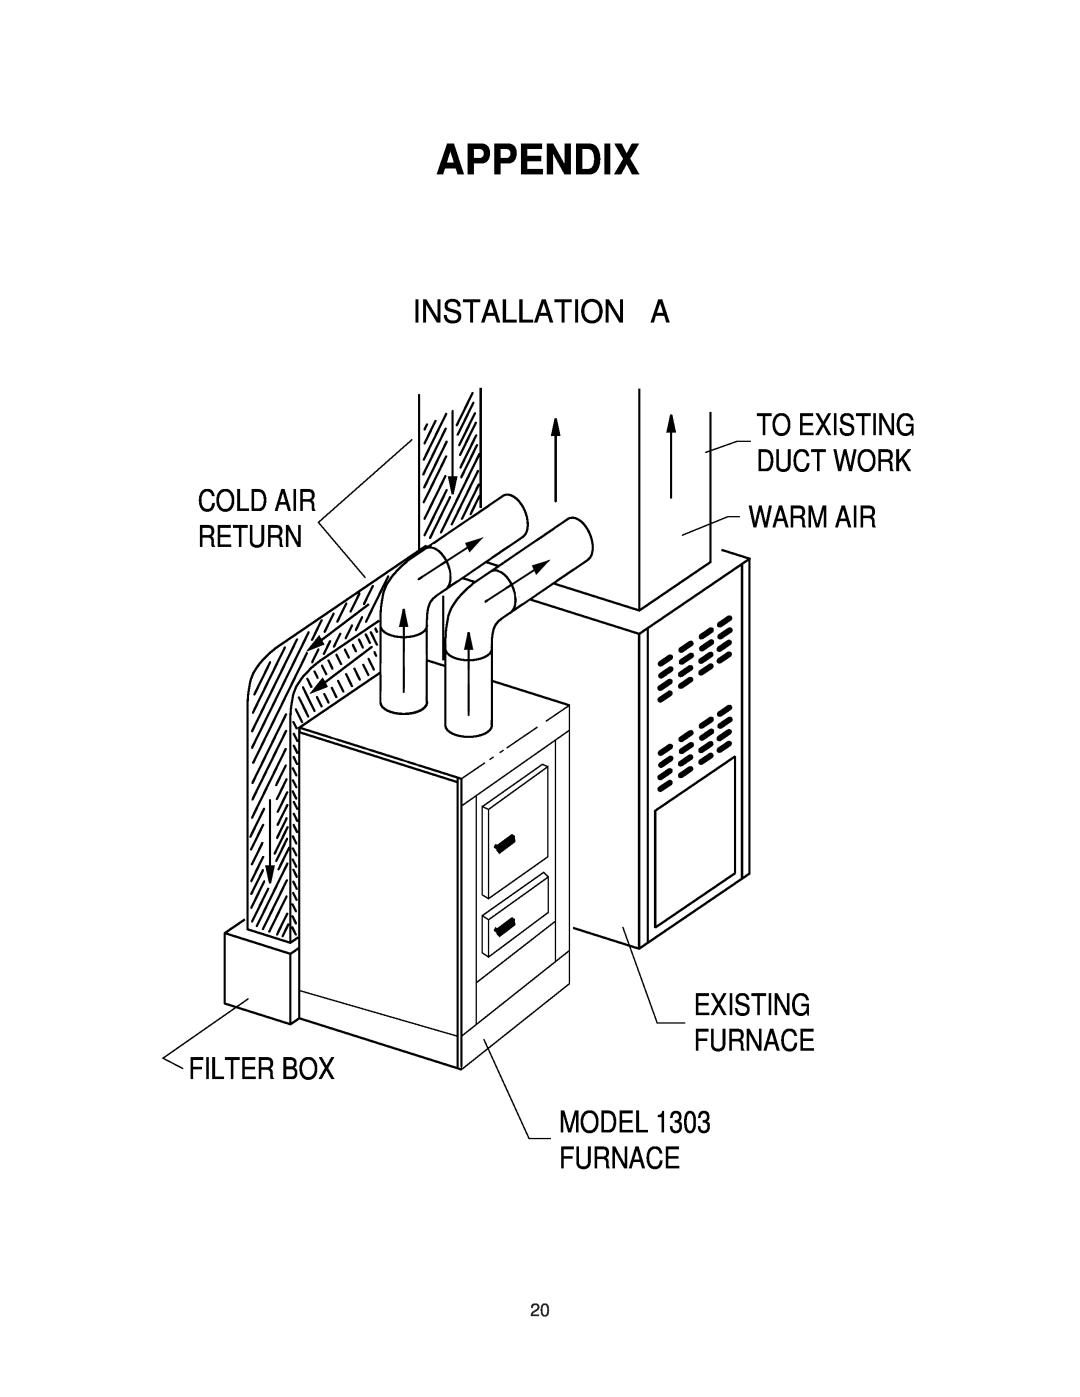 United States Stove 1303, AIR warranty Appendix, Installation A, Filter Box, To Existing Duct Work Warm Air Existing Furnace 